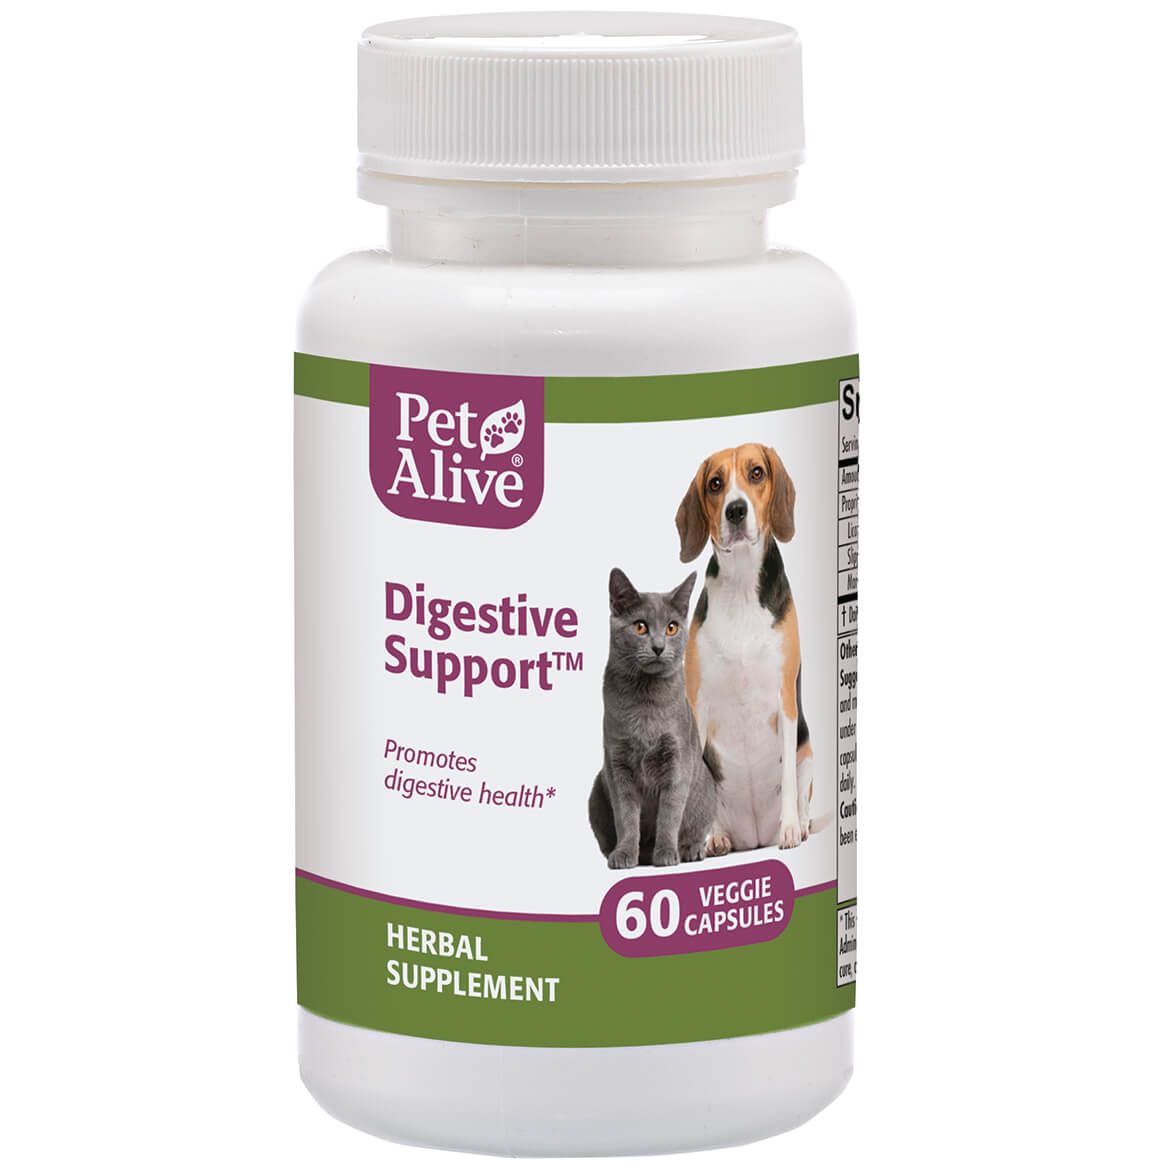 Digestive Support™ for Cat & Dog Digestion + '-' + 351883